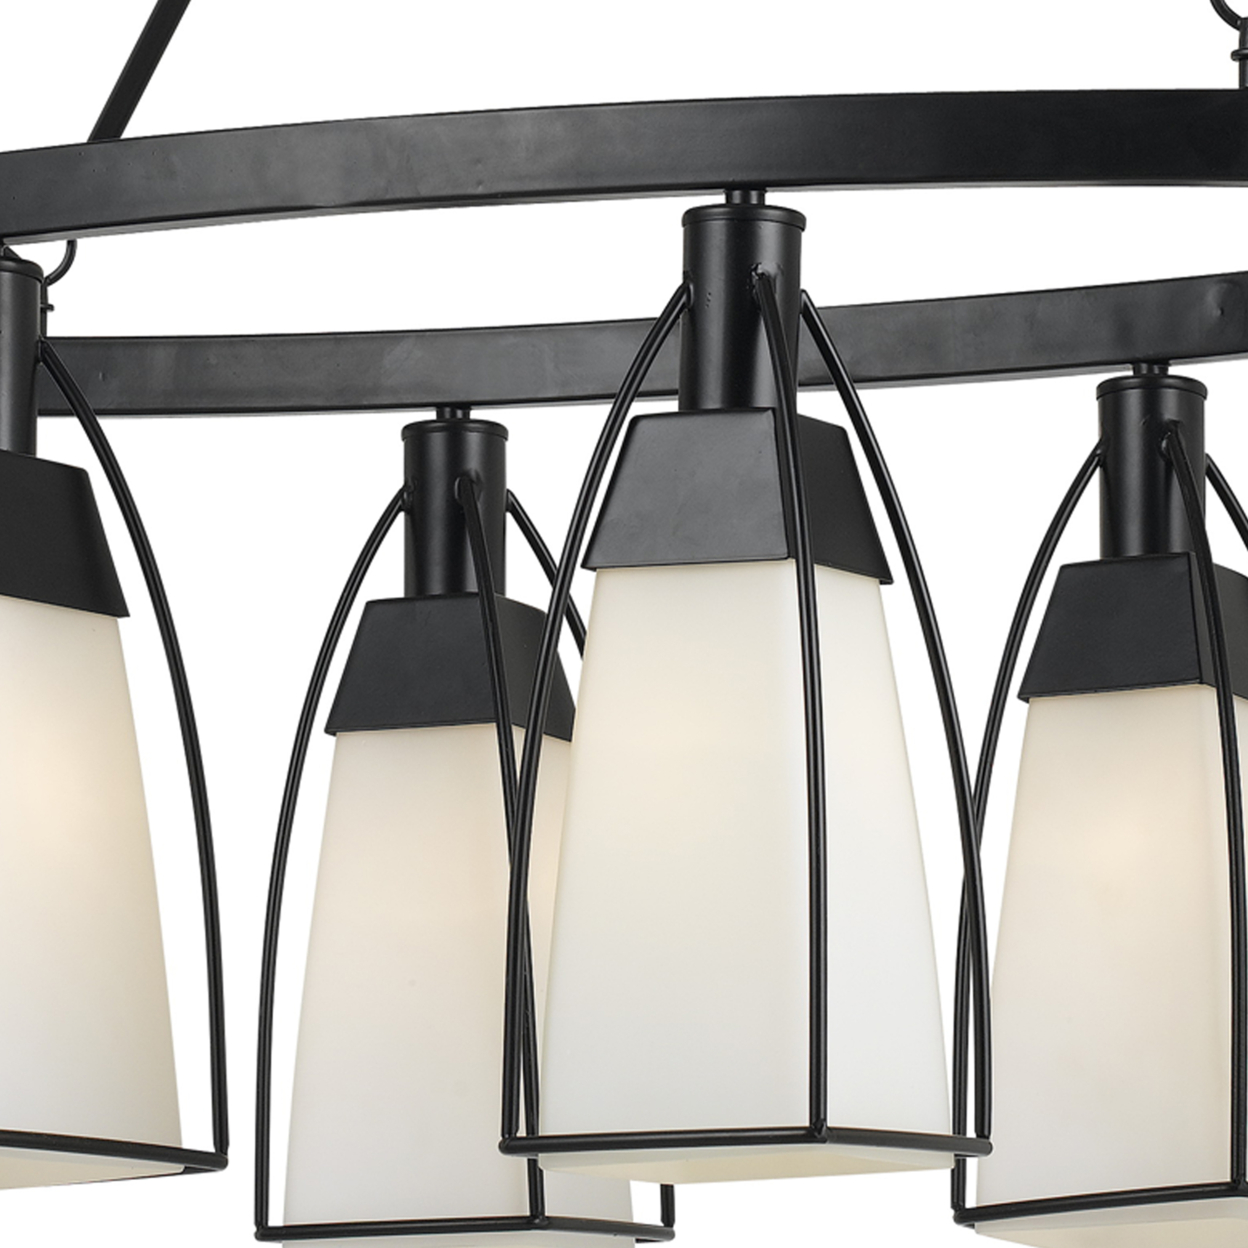 6 Bulb Oval Metal Frame Chandelier With Glass Shades, Black And White- Saltoro Sherpi